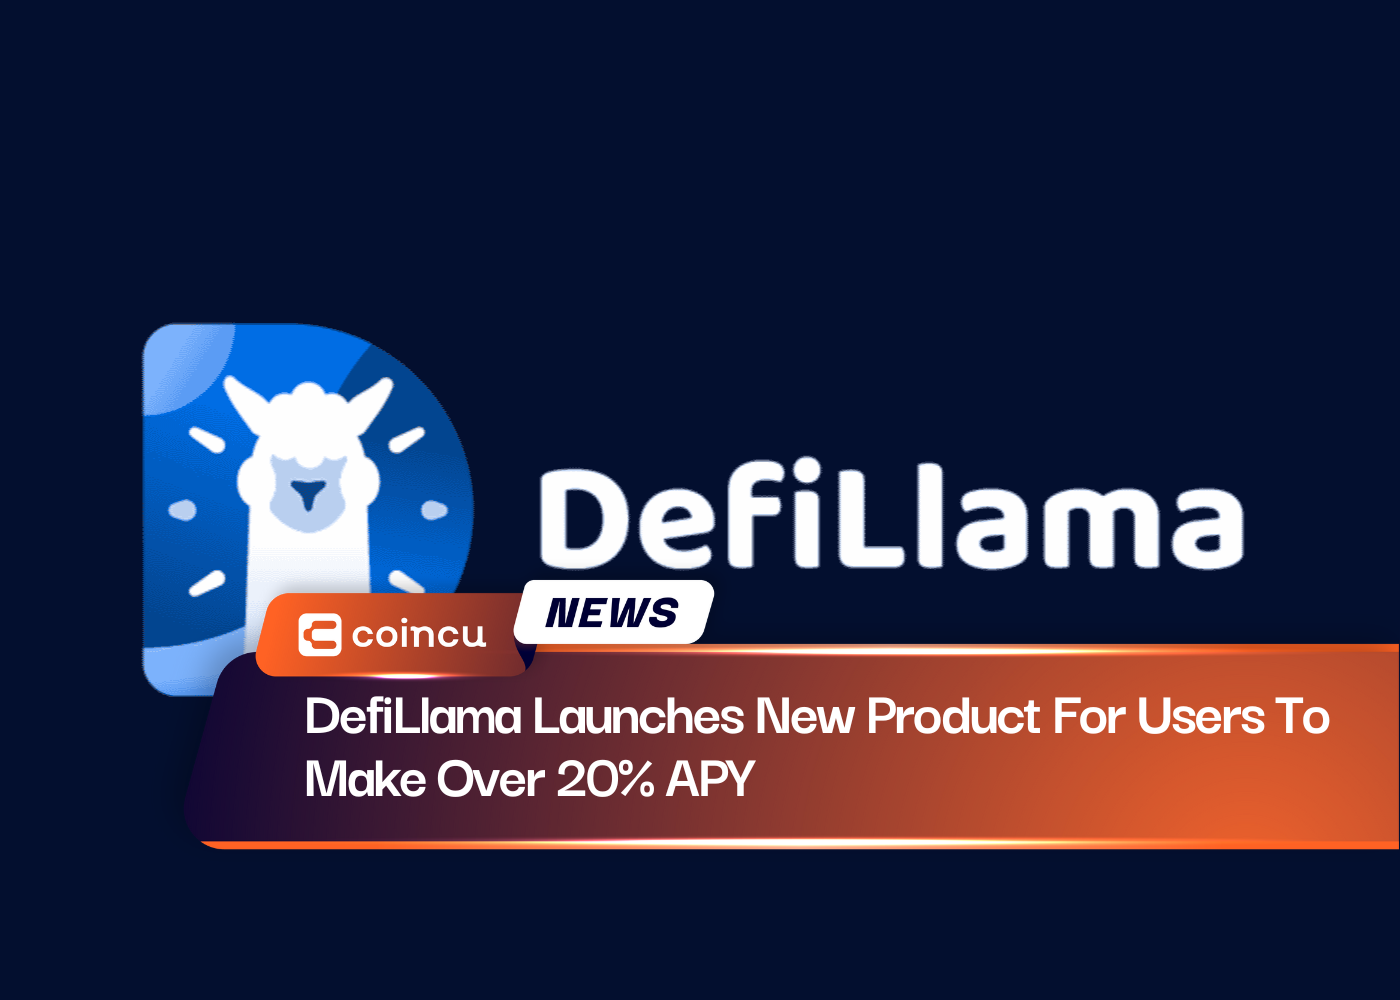 DefiLlama Launches New Product For Users To Make Over 20% APY